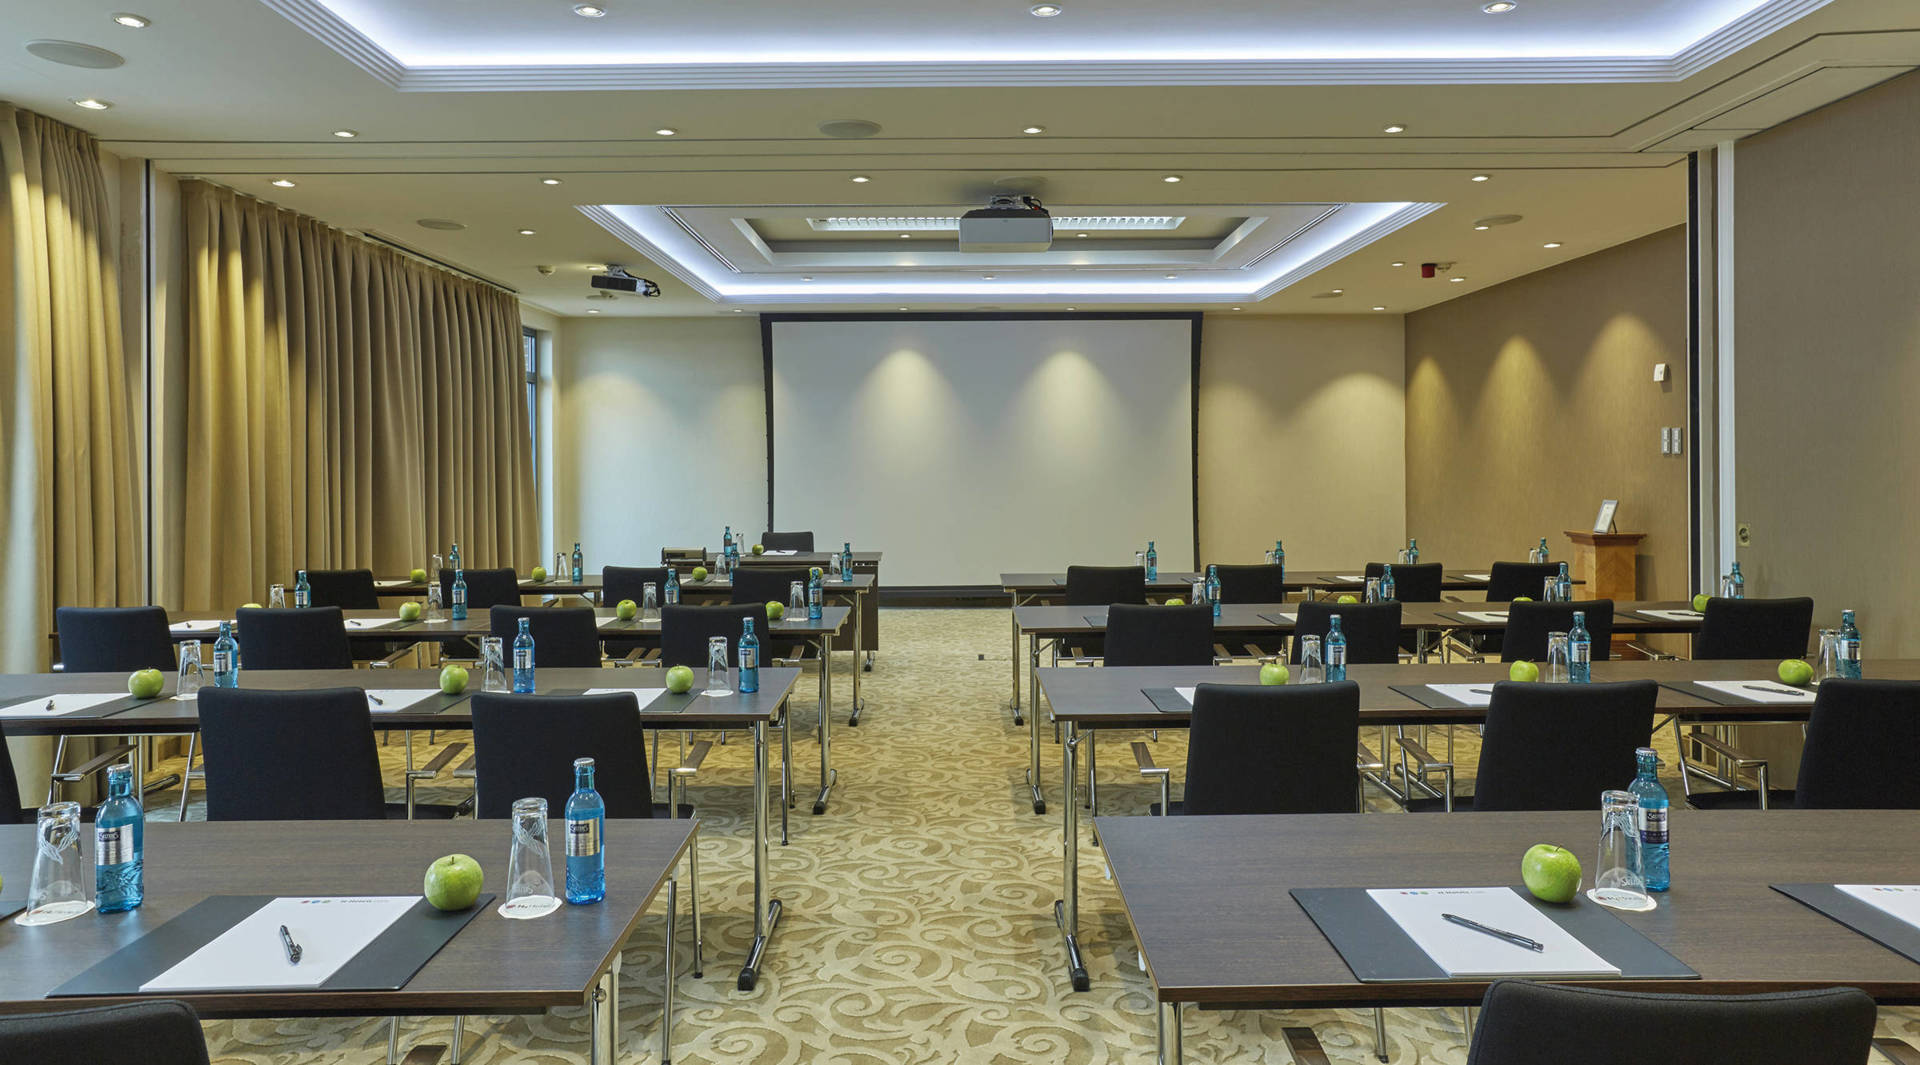 Modern meeting rooms at the H4 Hotel Hannover Messe - Official website